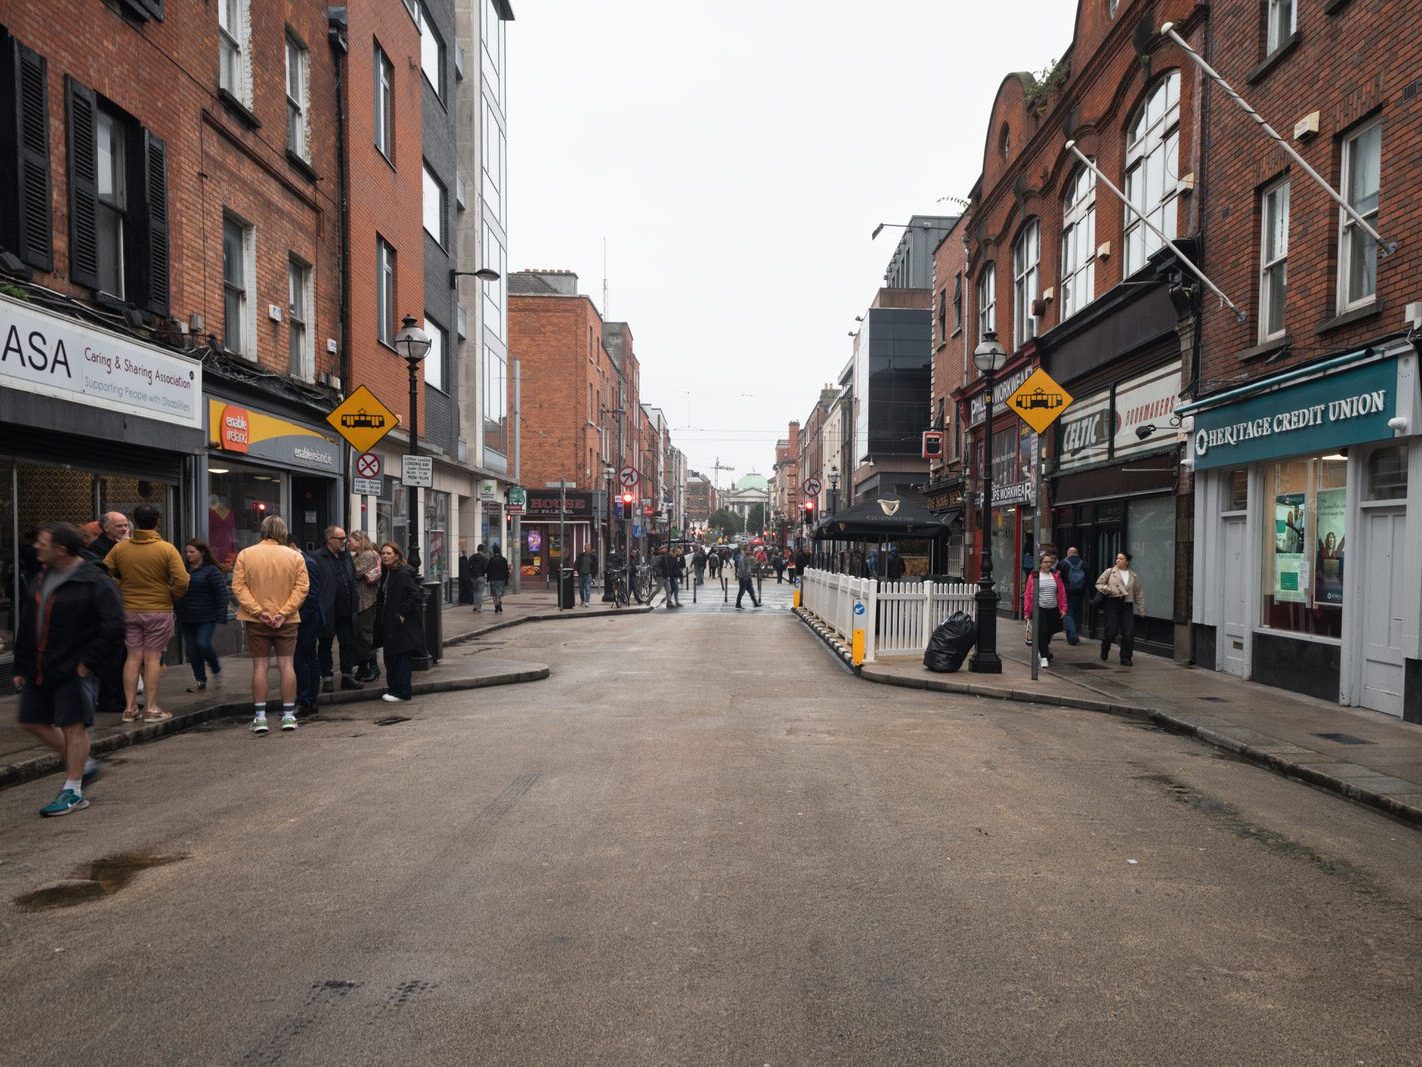 CAPEL STREET ON A DULL WET DAY [INTERIM CAPEL STREET IMPROVEMENT WORKS ARE NOW ONGOING] 018